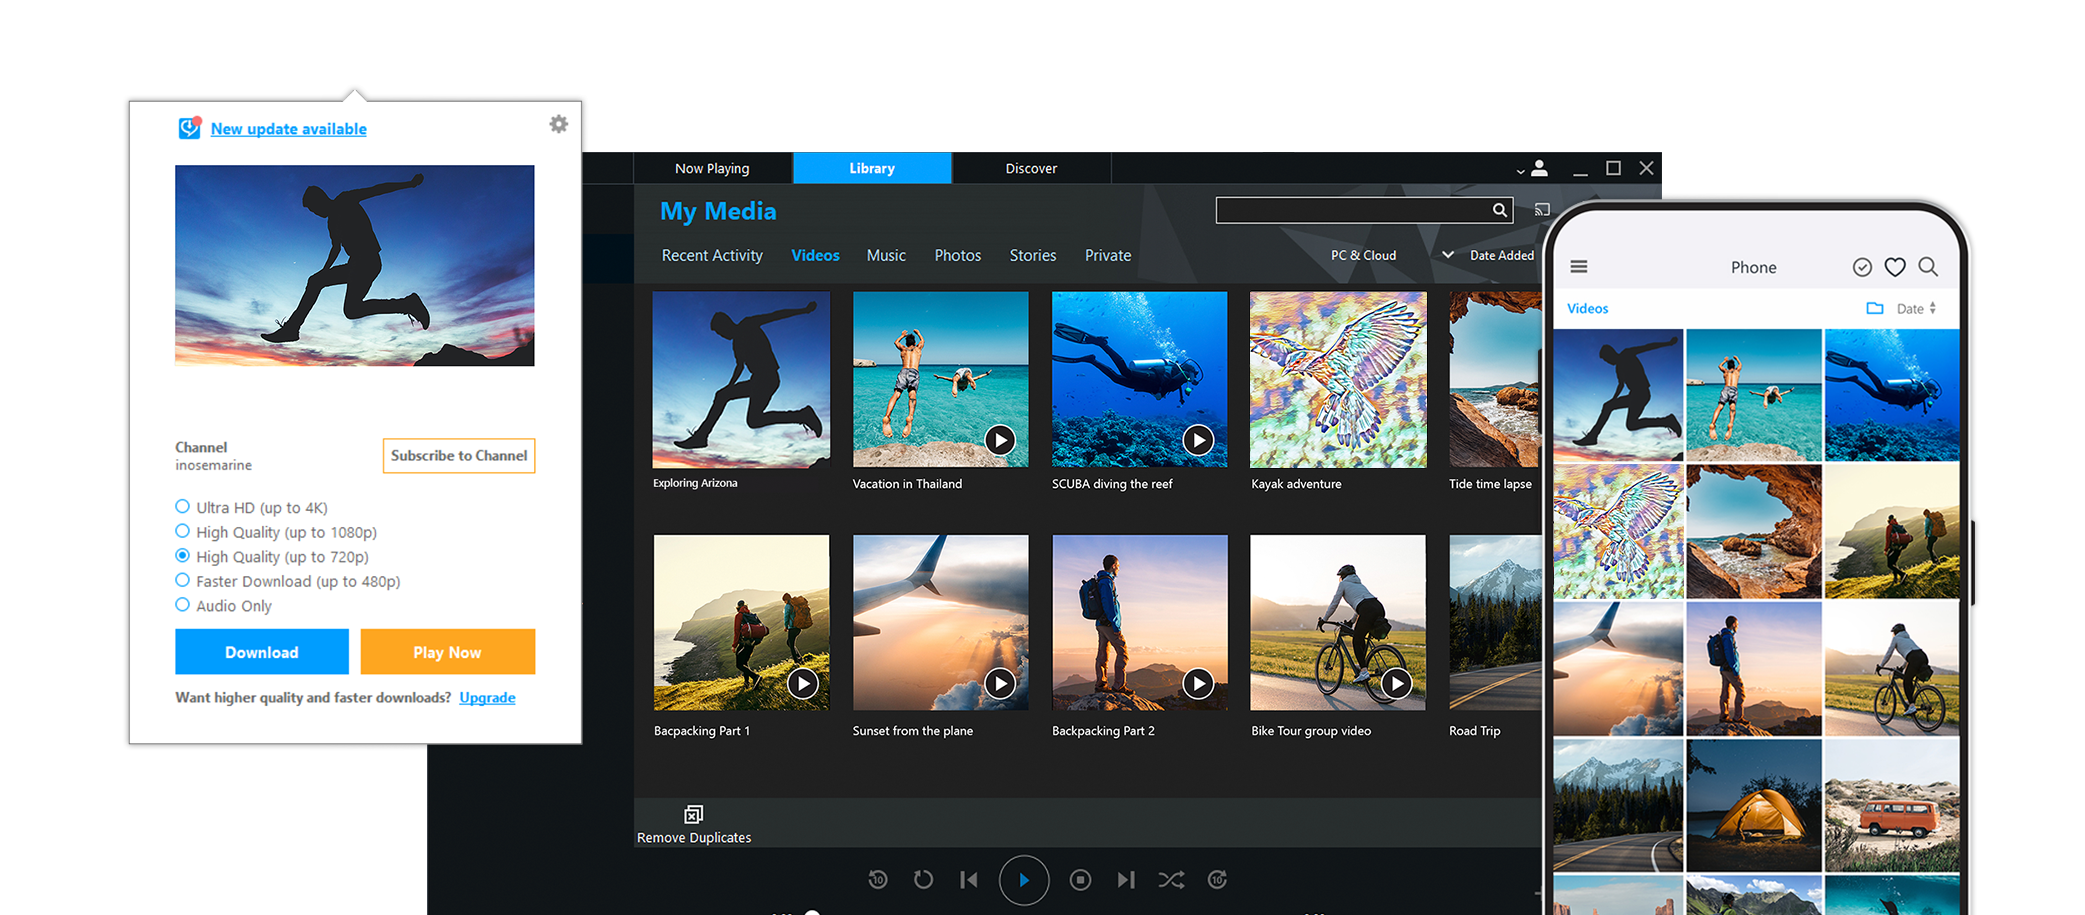 picture of RealPlayer PC and RealPlayer Mobile with main features as text: Netter than ever1-click Video Downloader, Dark Or Light Mode, Download videos directly to your phone, PLUS all the things you already love about RealPlayer